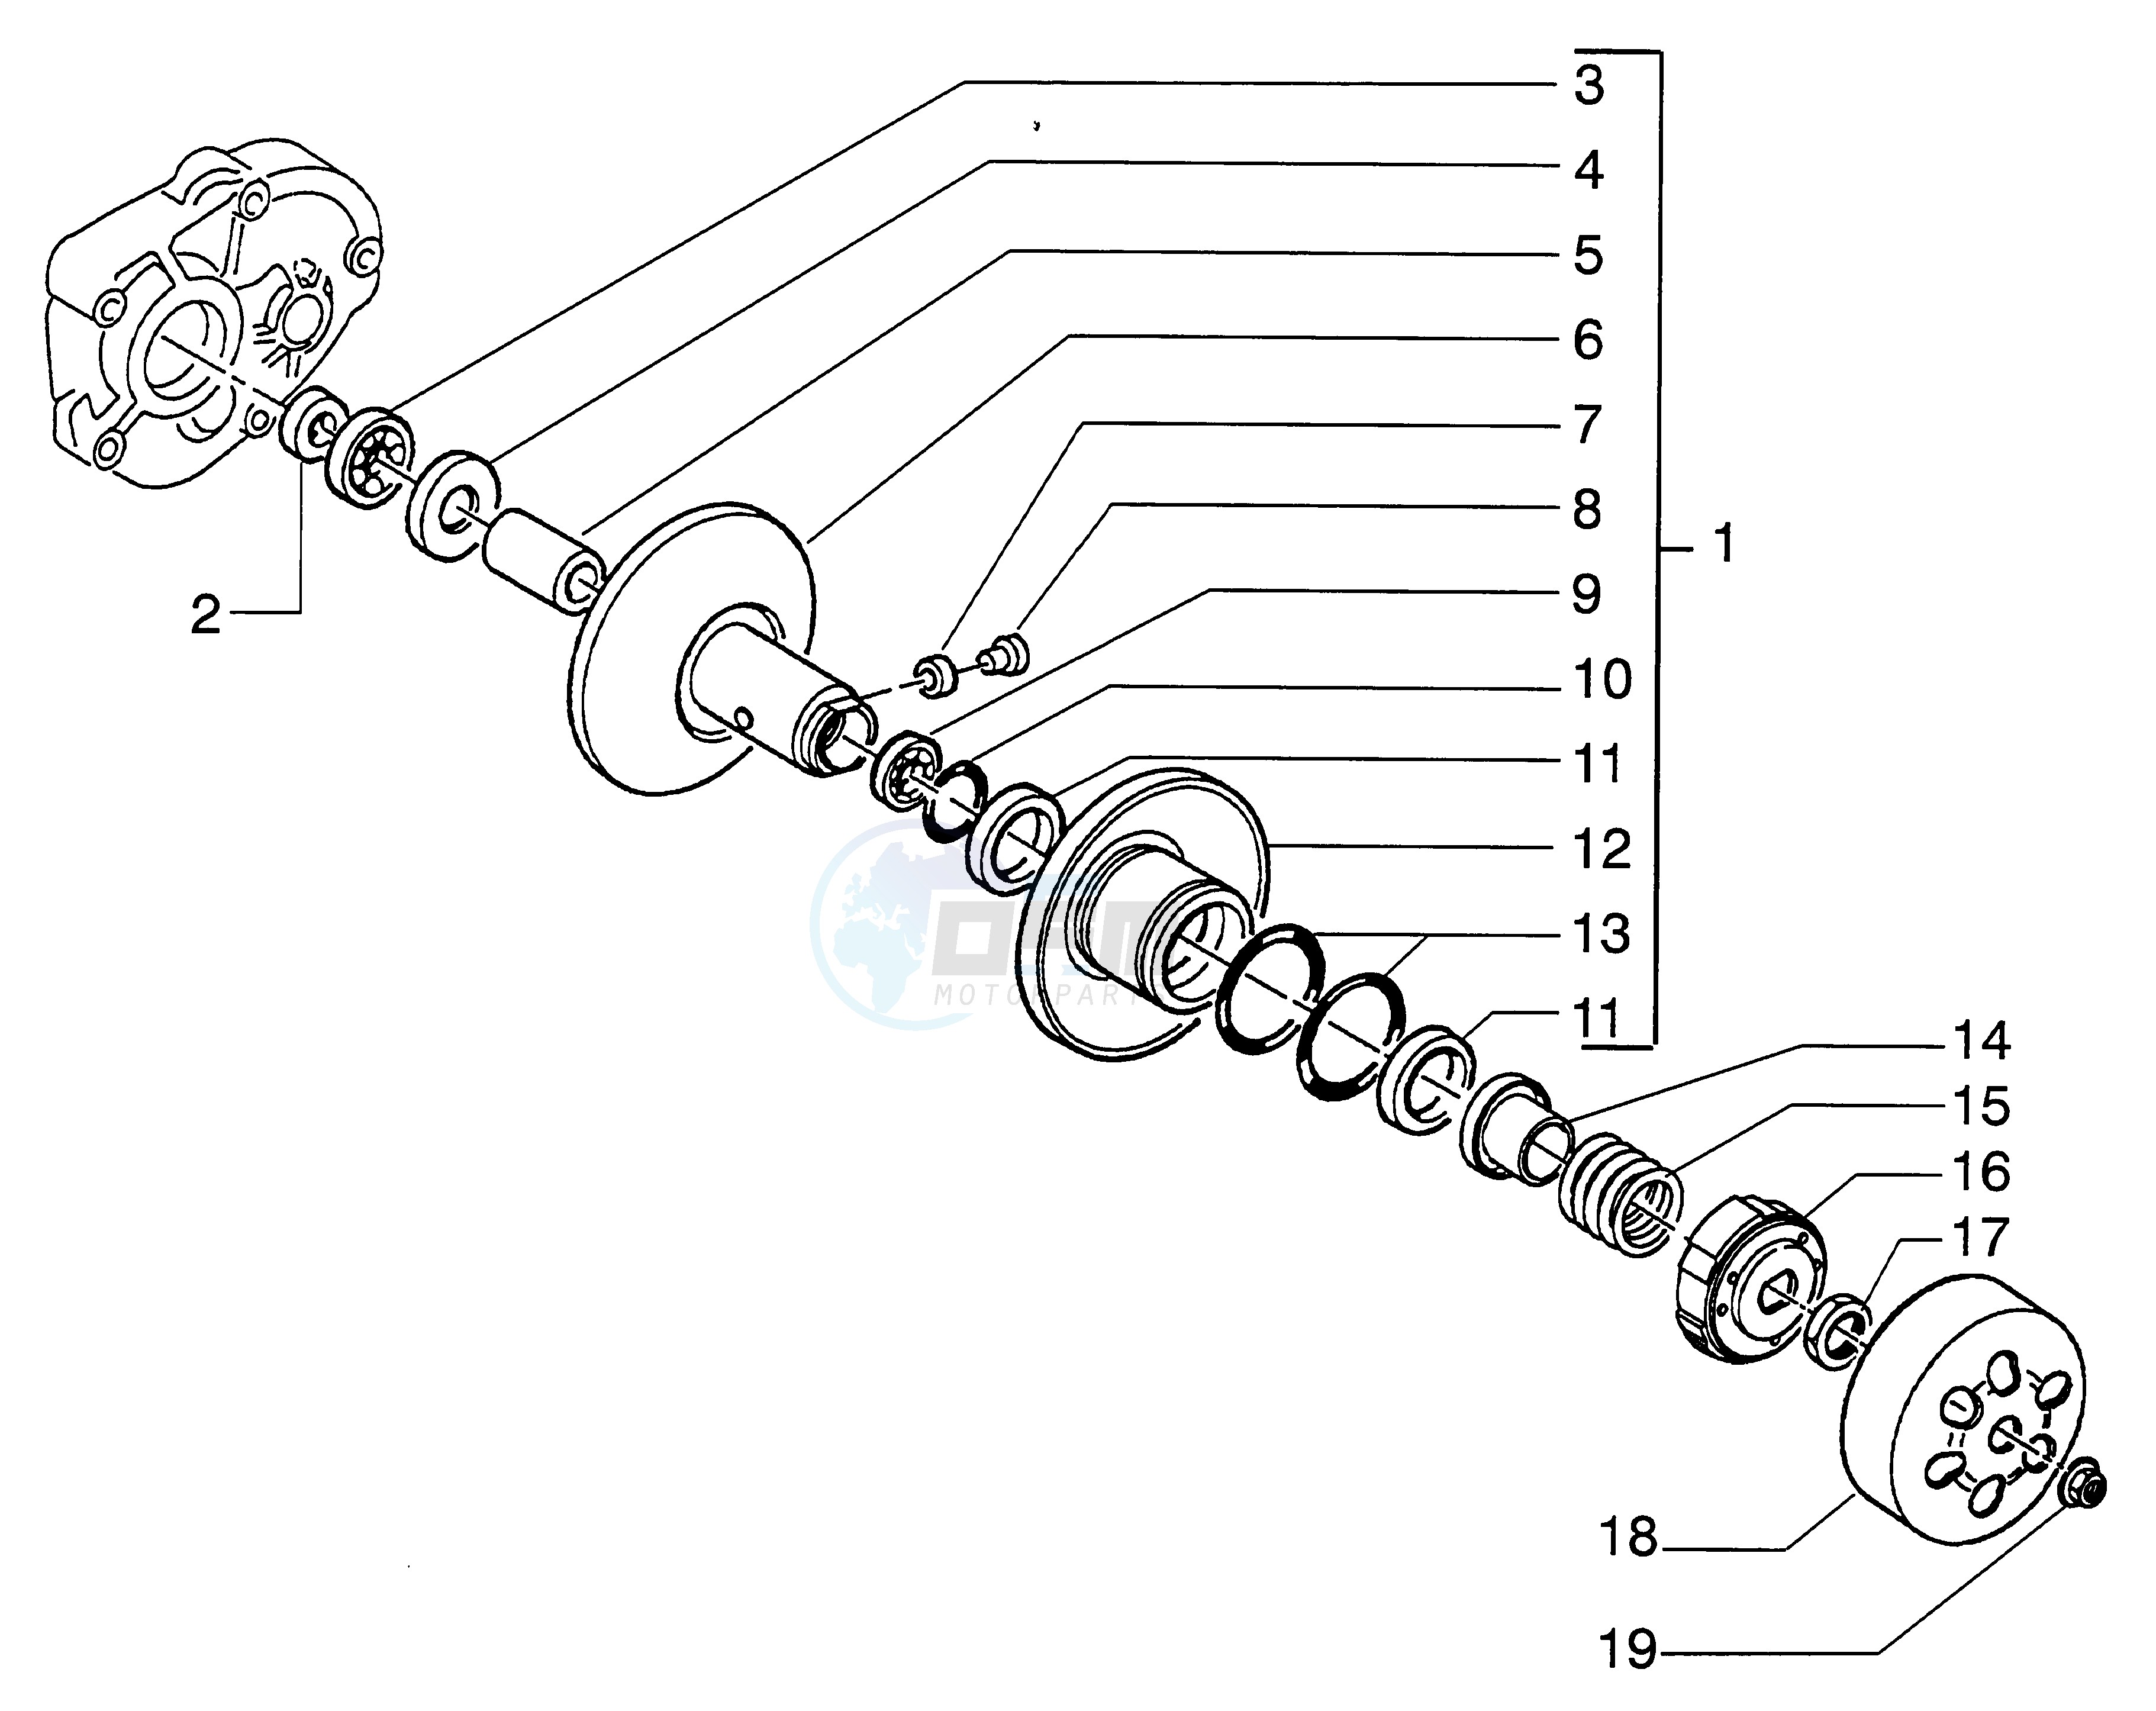 Fixed half-pulley image